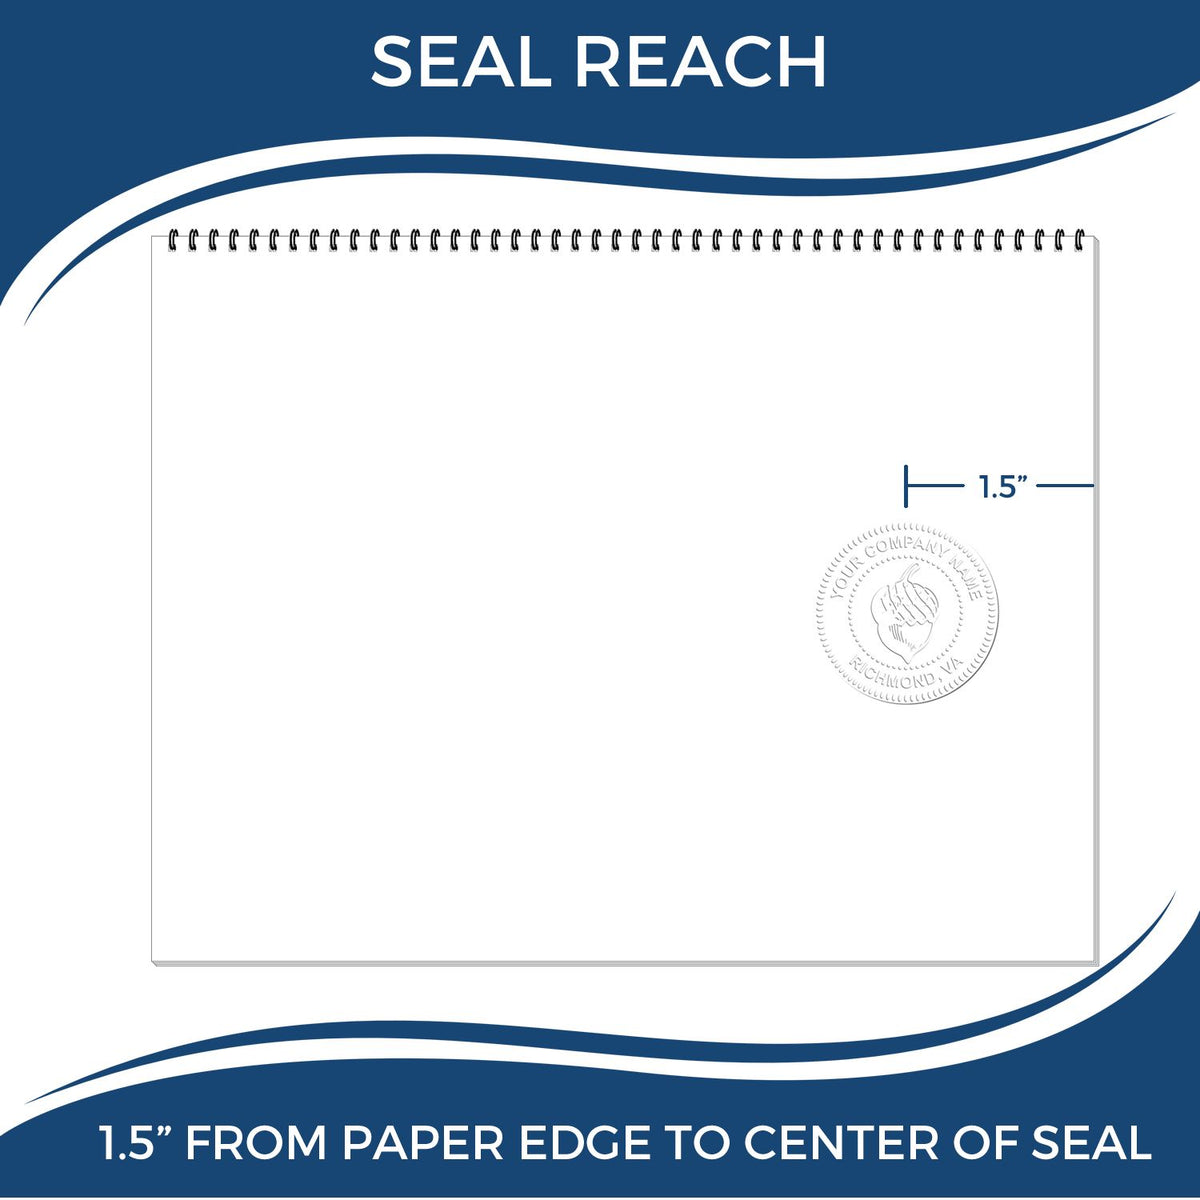 An infographic showing the seal reach which is represented by a ruler and a miniature seal image of the Gift Virginia Engineer Seal